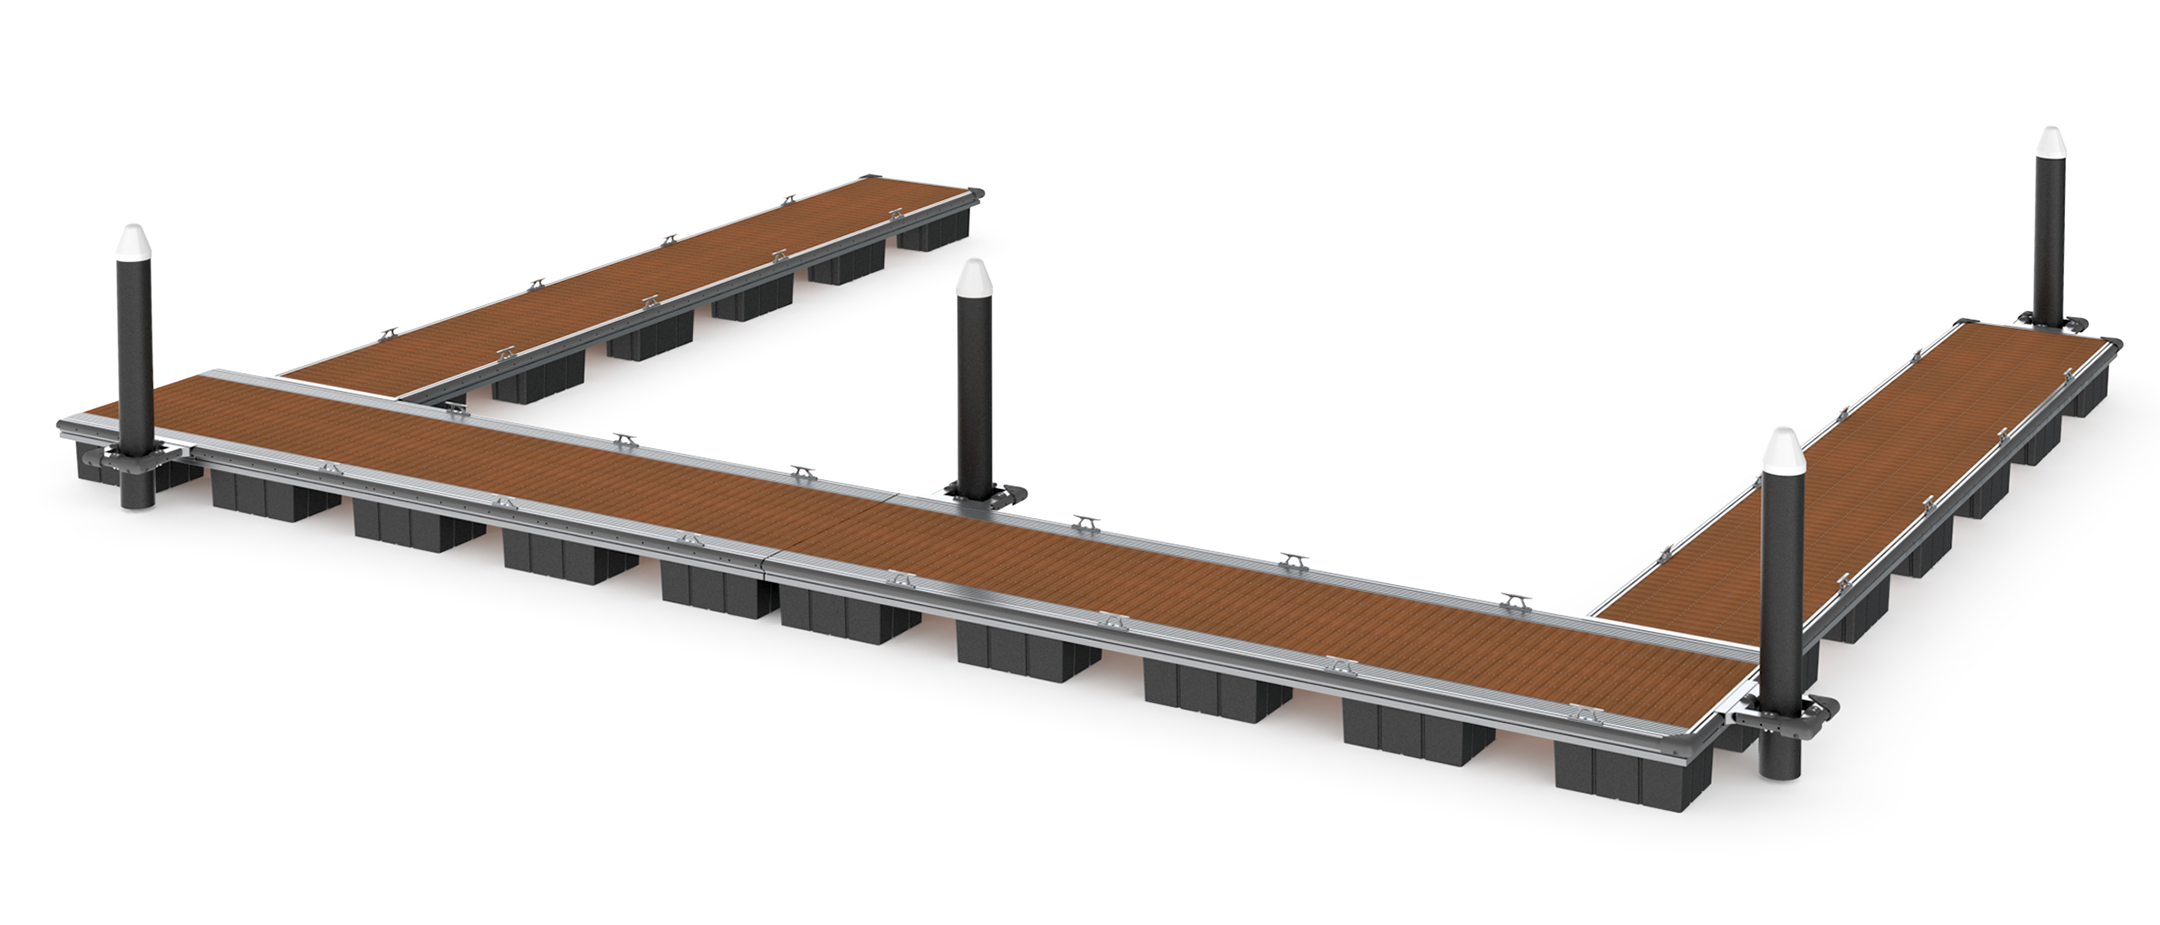 3D rending of Great Lakes floating dock system